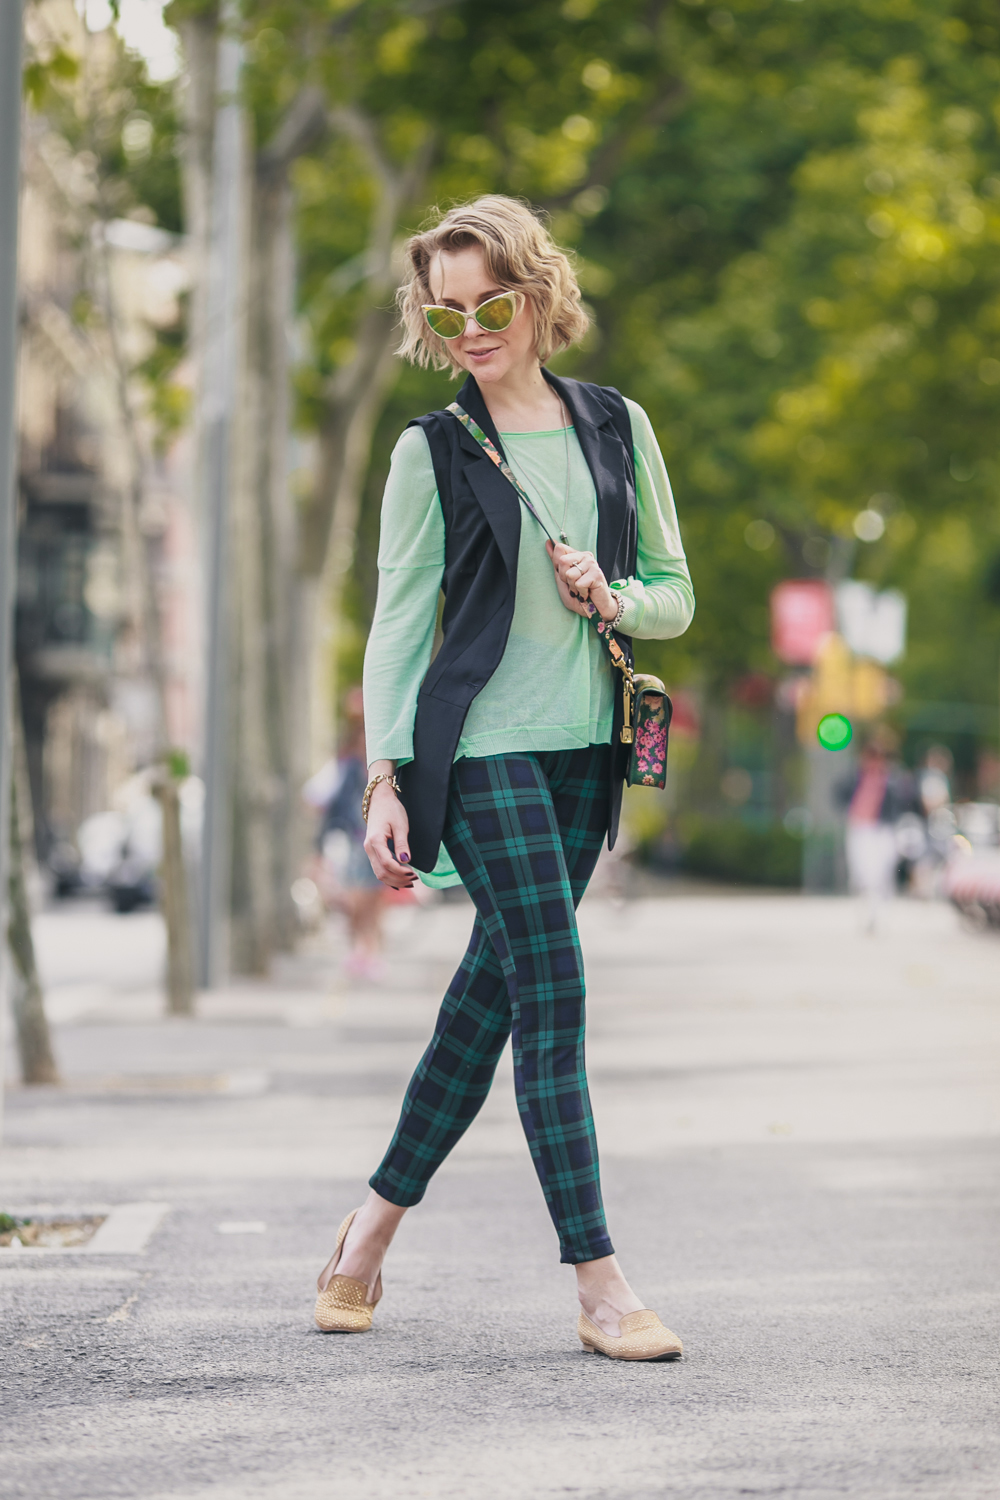 darya kamalova fashion blogger from thecablook in Barcelona wears sophie hulme flower bag with santa clara loafers and sheinside tartan green pants-3213 copy